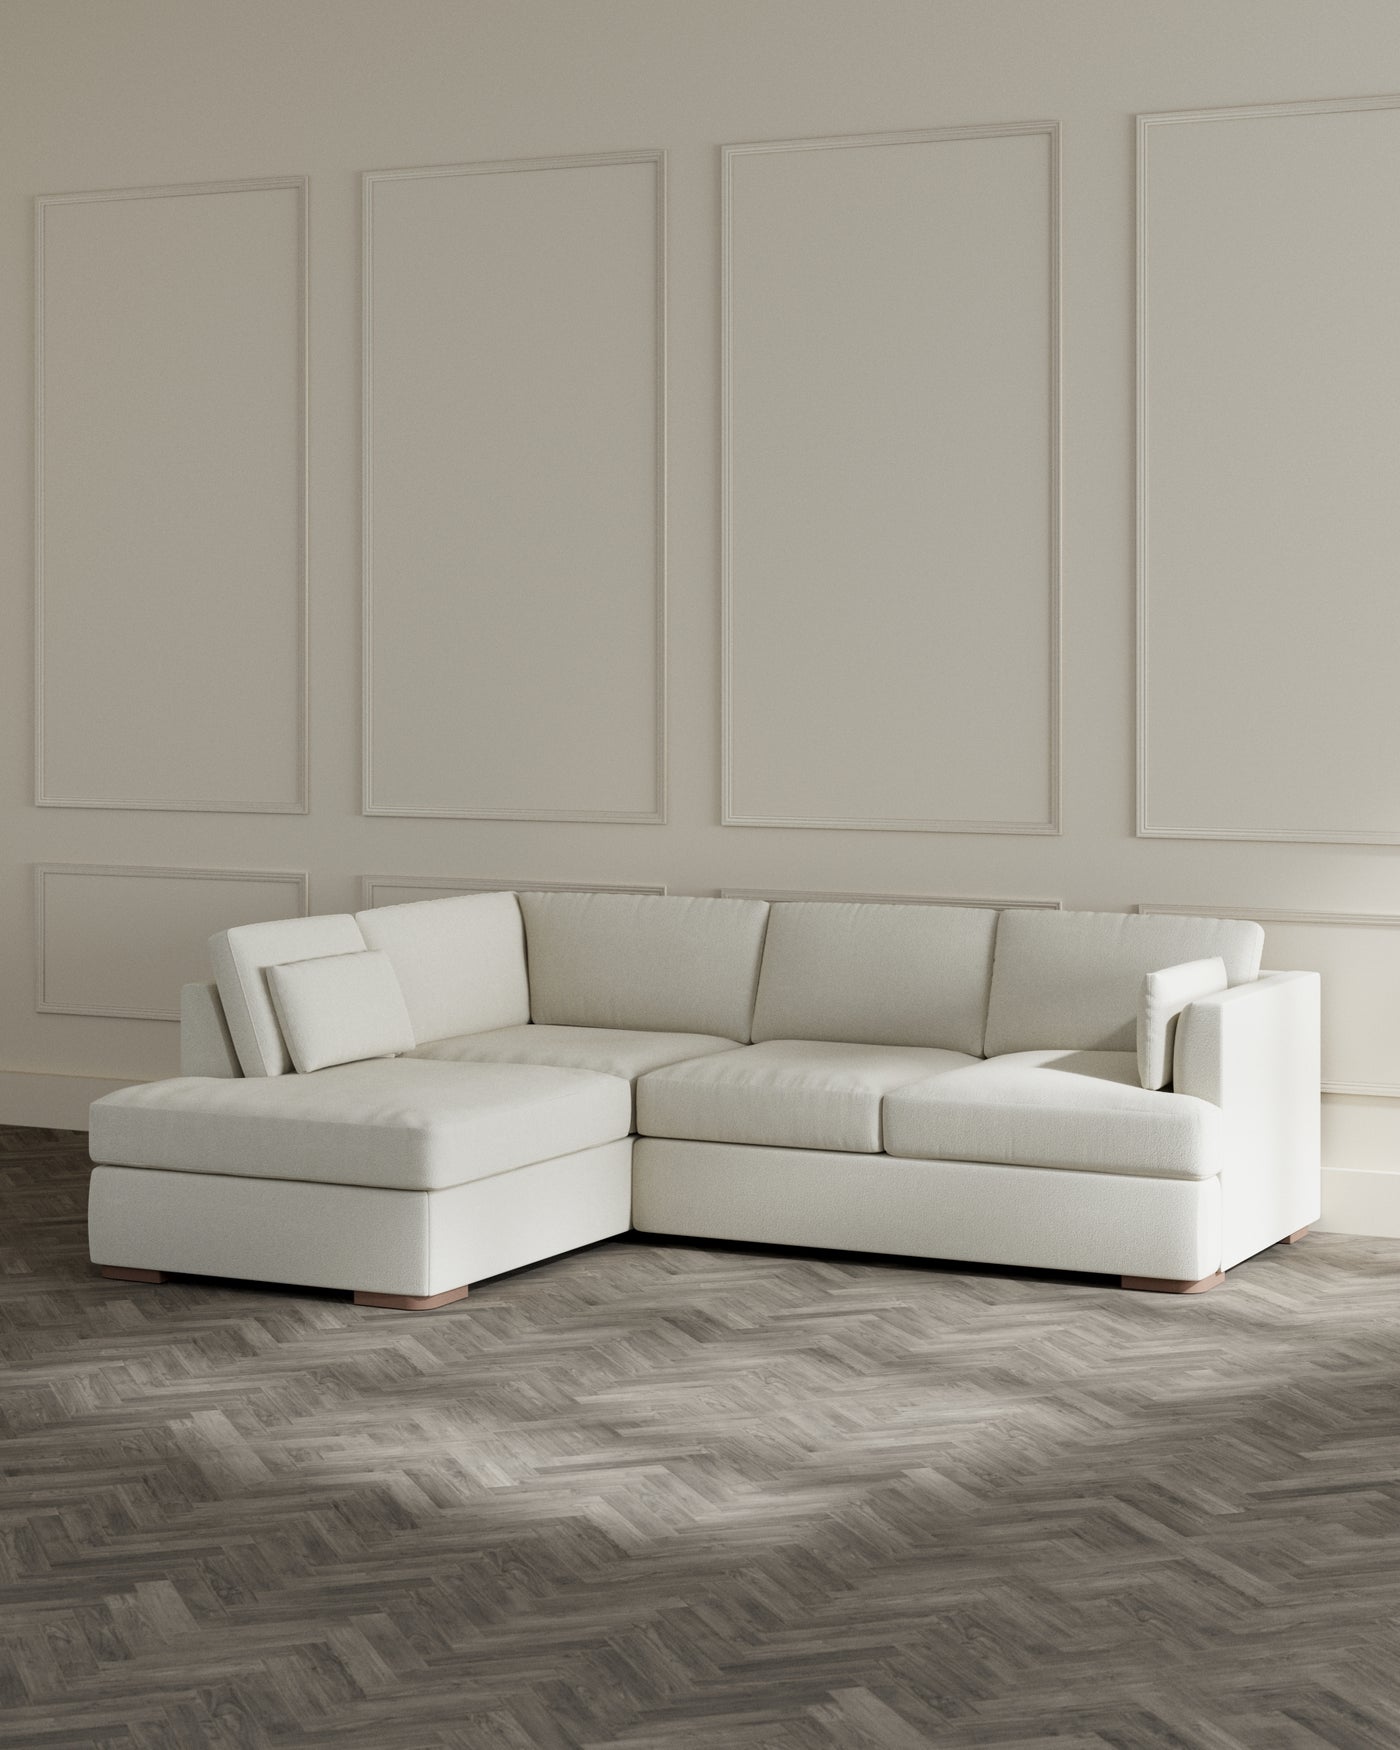 Modern L-shaped sectional sofa with a chaise lounge in a light cream fabric upholstery, featuring clean lines and a minimalist design, set on a herringbone pattern wooden floor, with a neutral-toned wall accented by elegant panelling in the background.